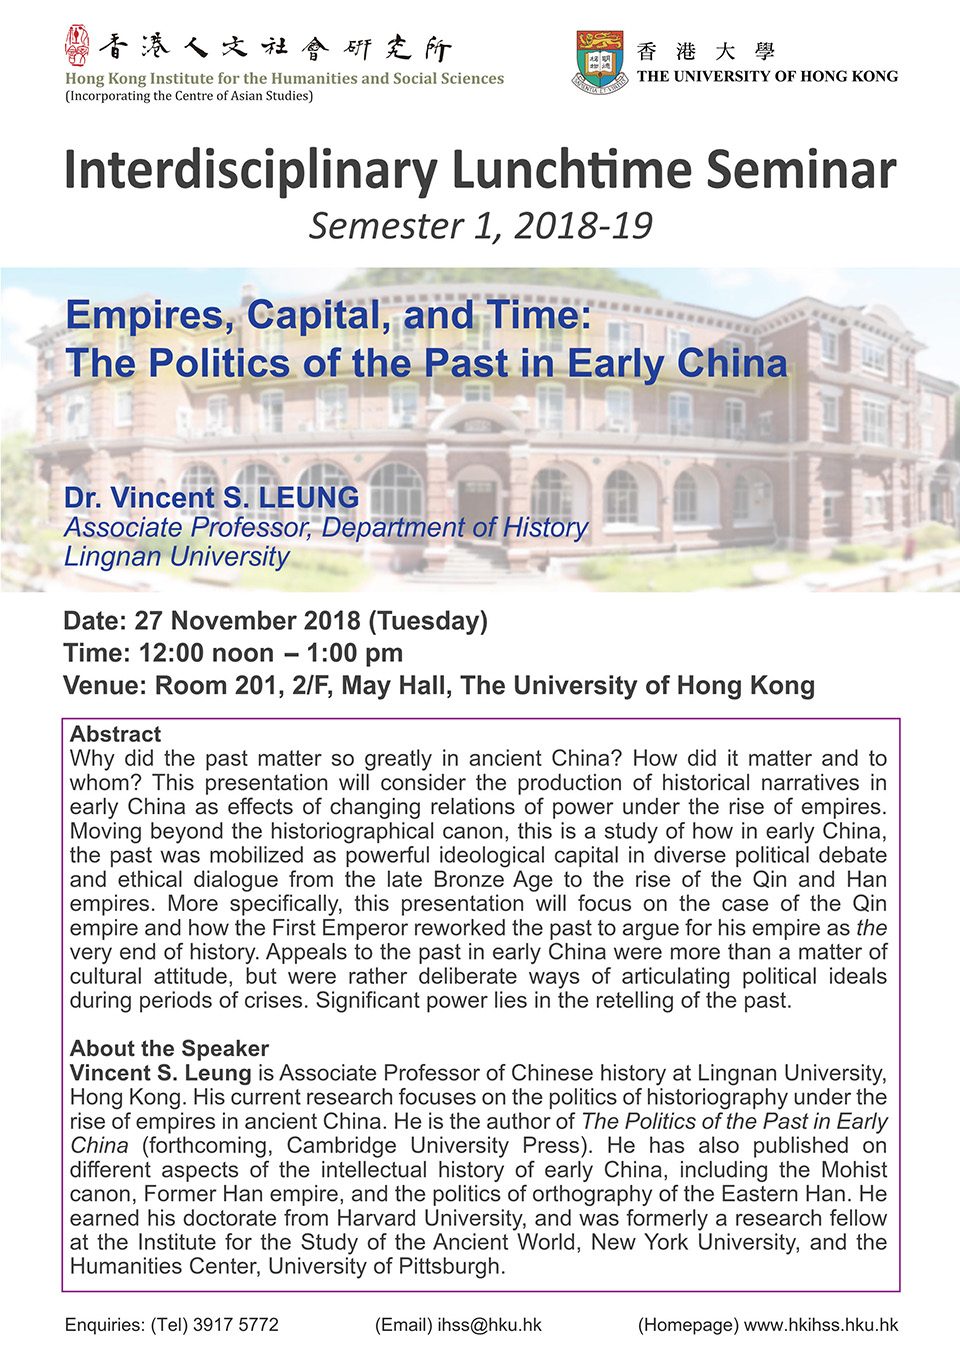 An Interdisciplinary Lunchtime Seminar on “Empires, Capital, and Time: The Politics of the Past in Early China” by Dr. Vincent S. Leung (November 27, 2018)